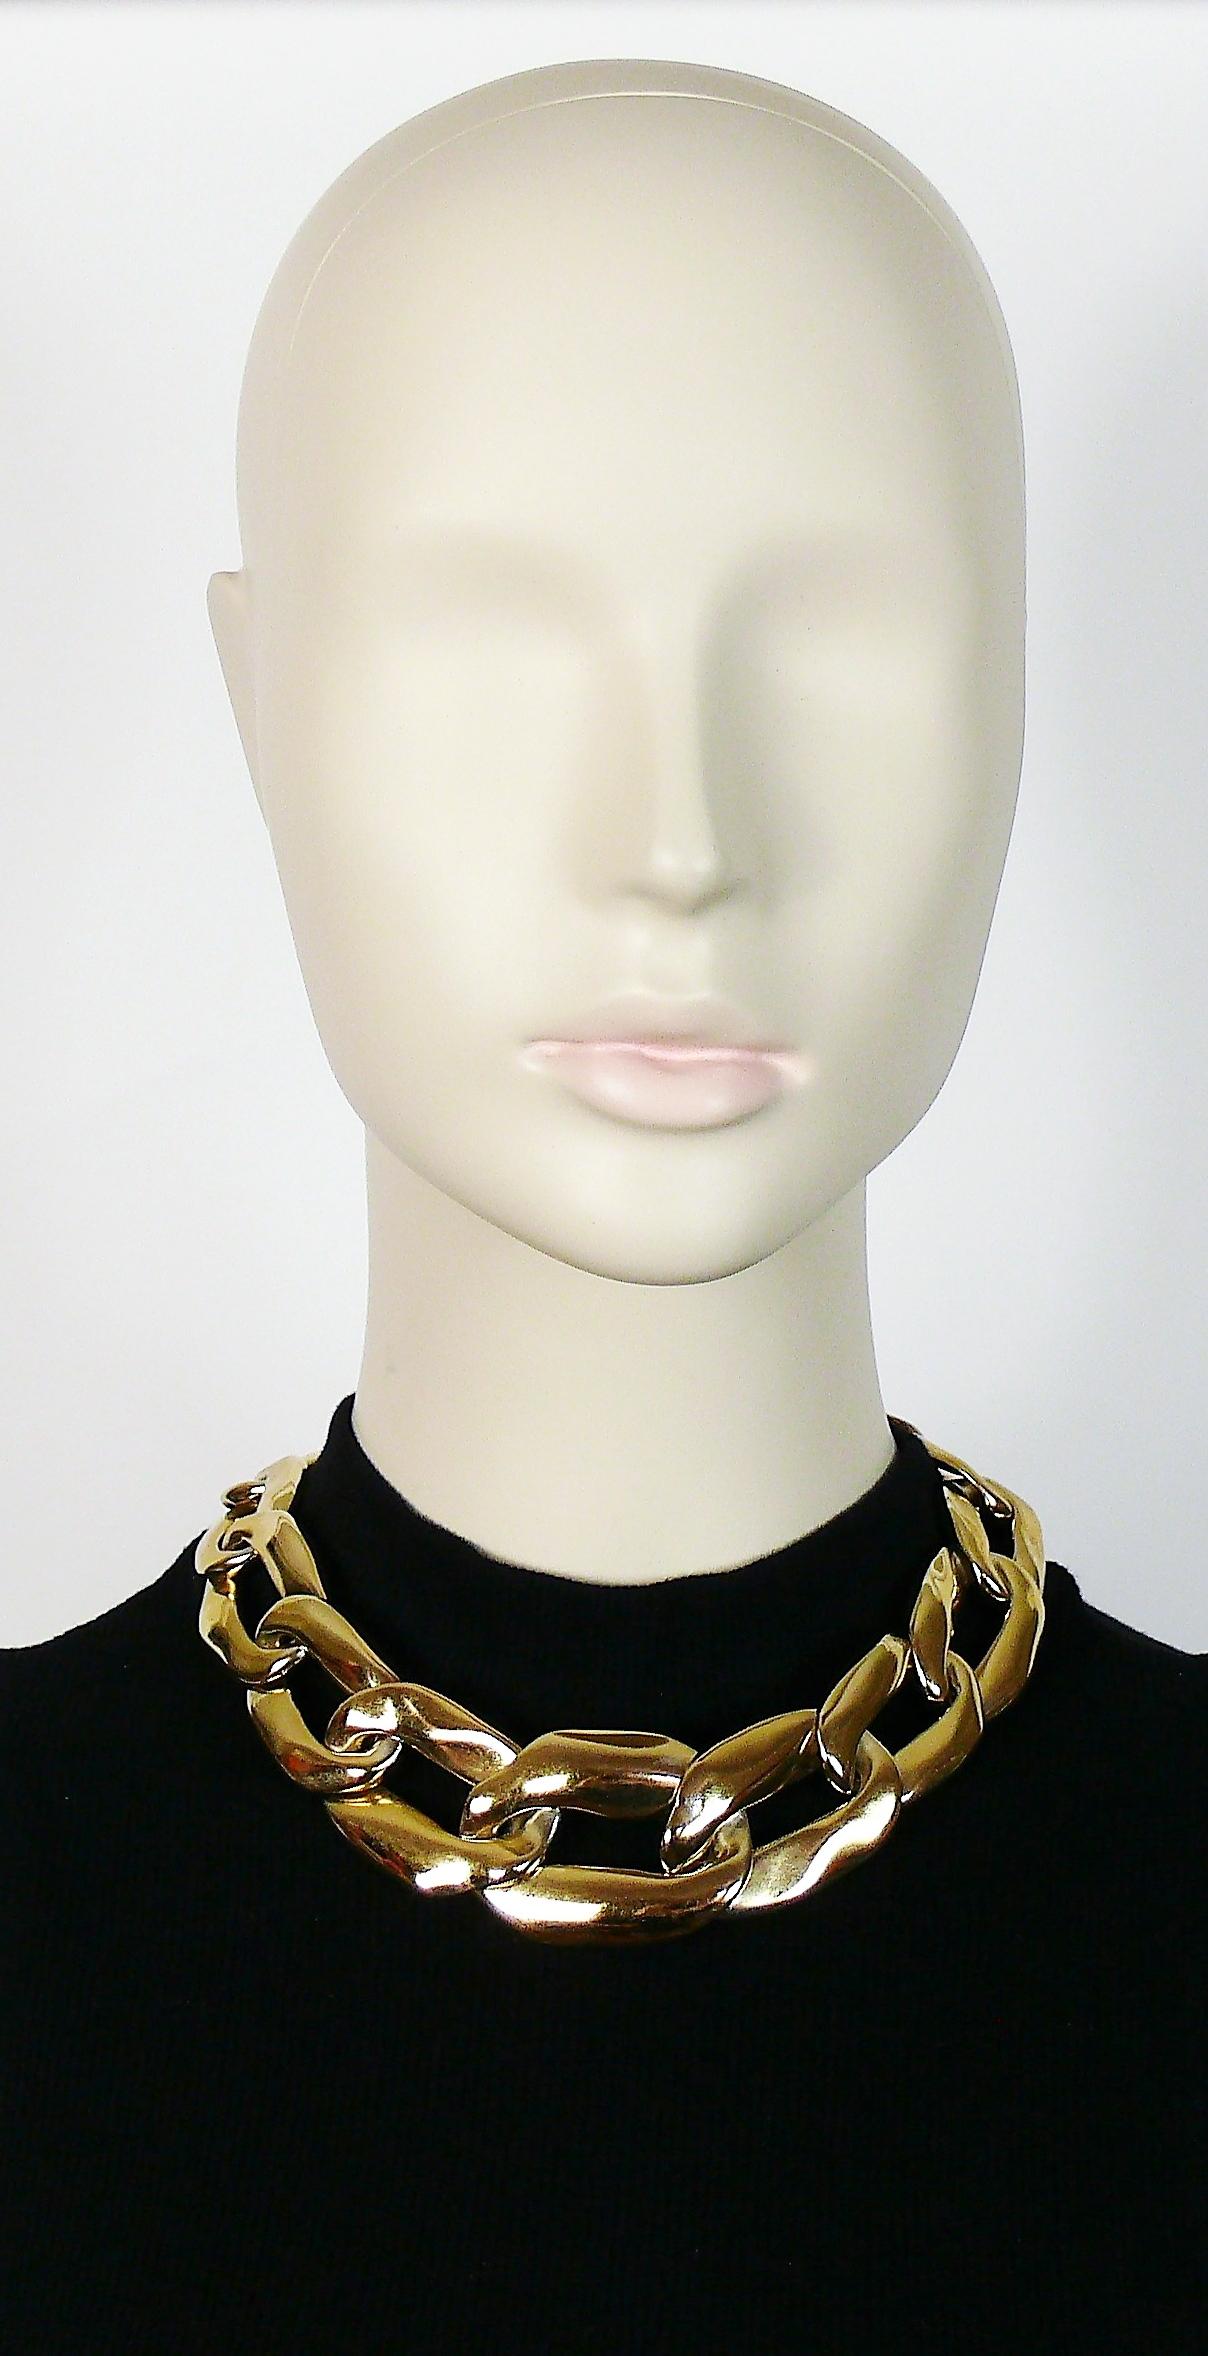 YVES SAINT LAURENT vintage ATHOS iconic gold toned curb chain necklace.

Hook clasp closure.
Adjustable length.

Embossed YSL Made in France.

Indicative measurements : adjustable length from approx. 43 cm (16.93 inches) to approx. 48 cm (18.90